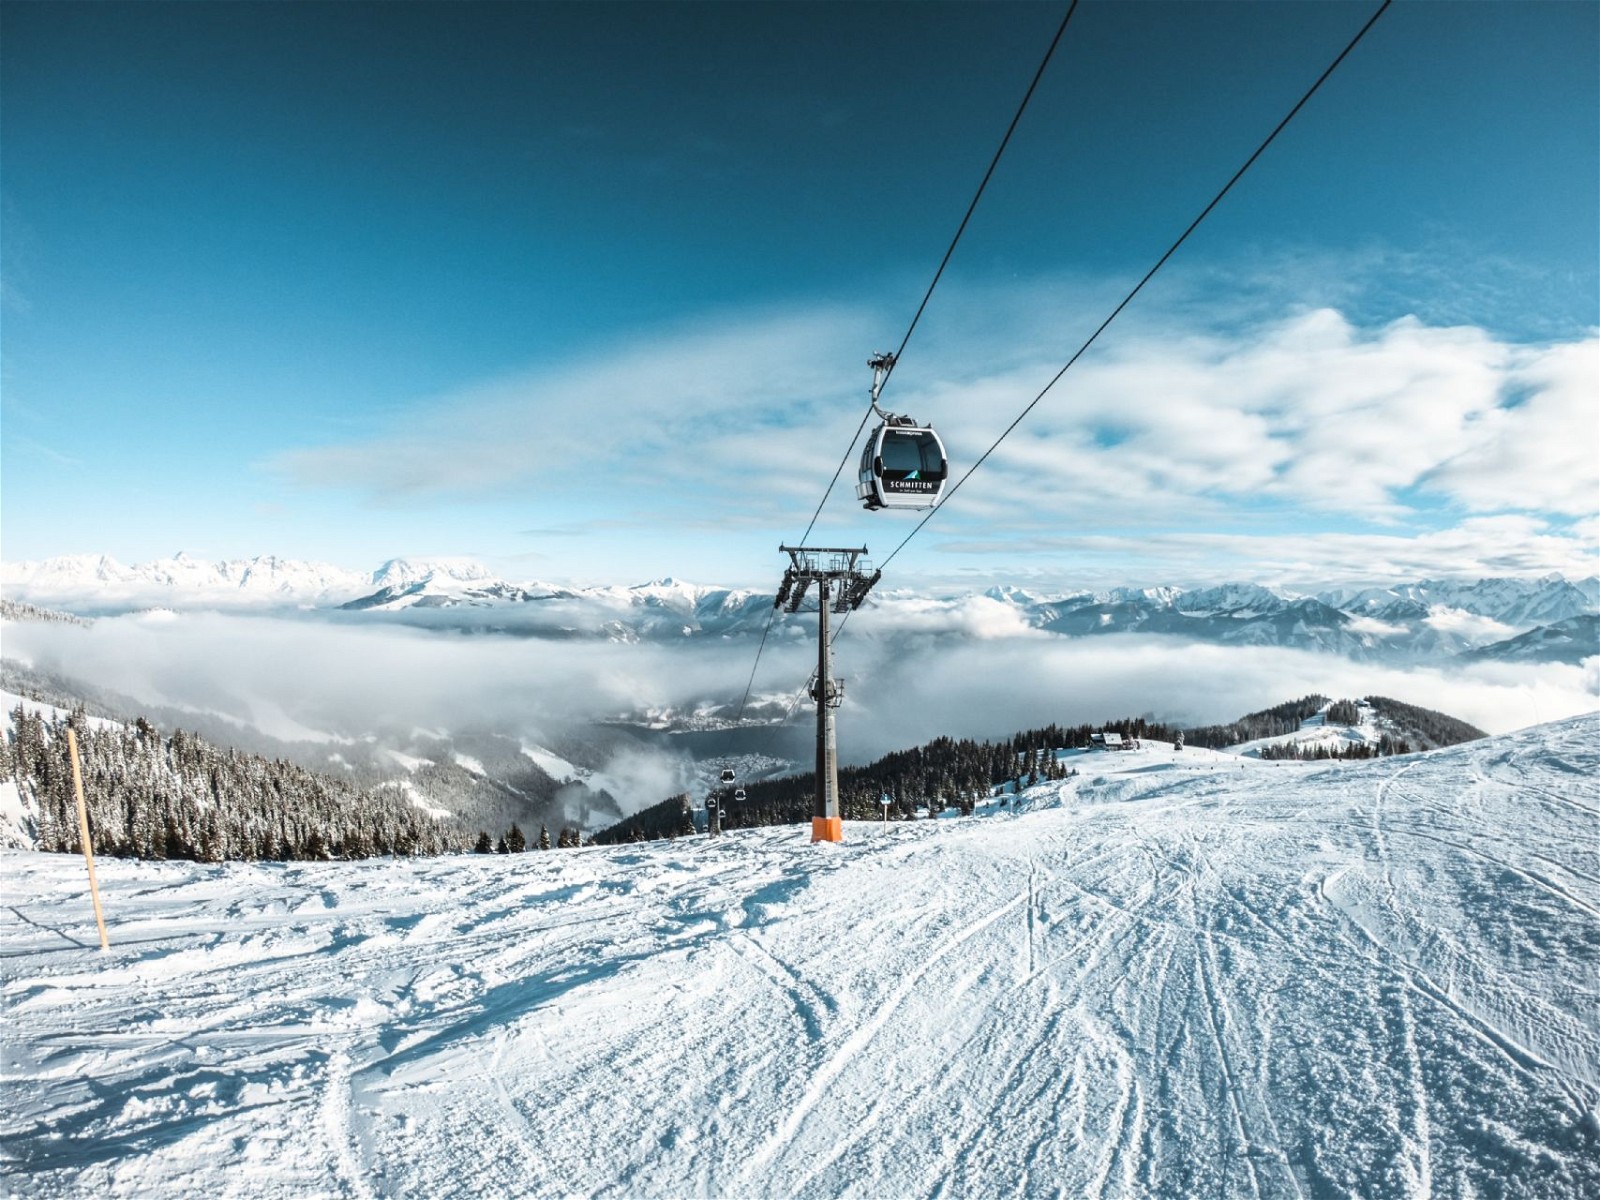 Zell am See is a popular destination for winter sports enthusiasts. With its proximity to the Alps, the town offers some of the best skiing and snowboarding opportunities in Austria